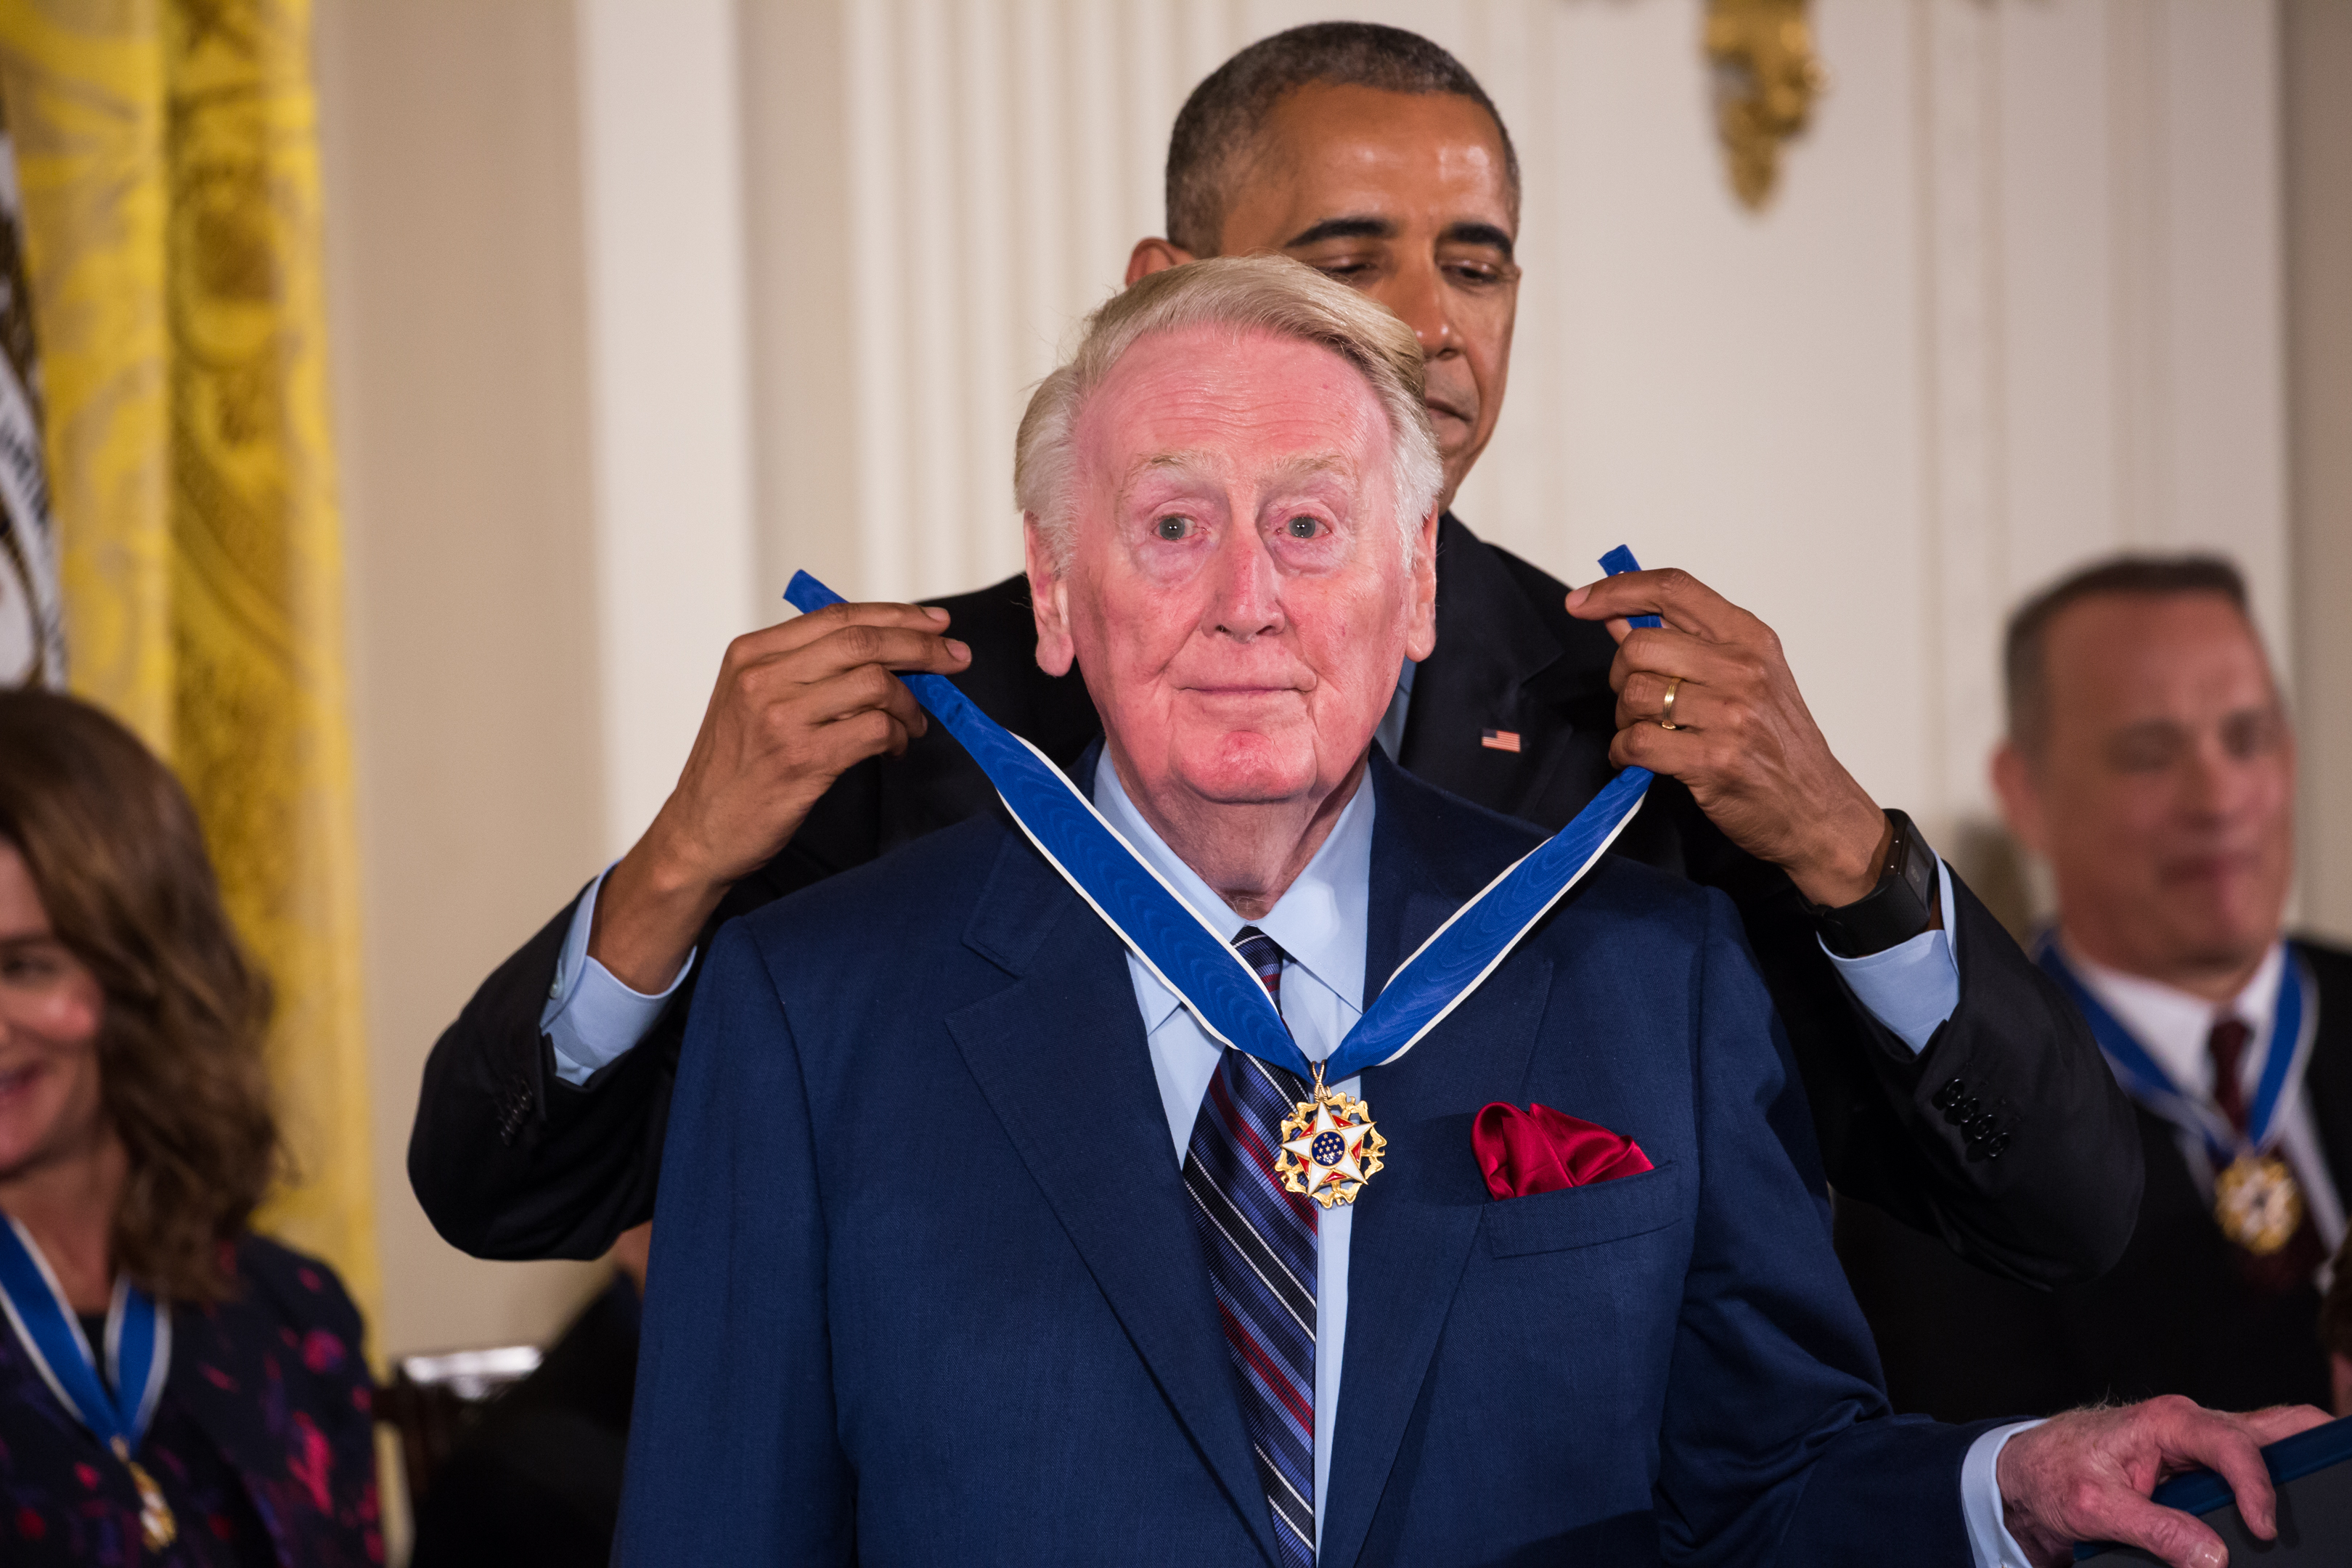 Vin Scully, the legendary Los Angeles Dodgers sportscaster who passed away, on Aug. 2, at 94, receives the Presidential Medal of Freedom from President Barack Obama in 2016. (Photo by Cheriss May/NurPhoto via Getty Images)